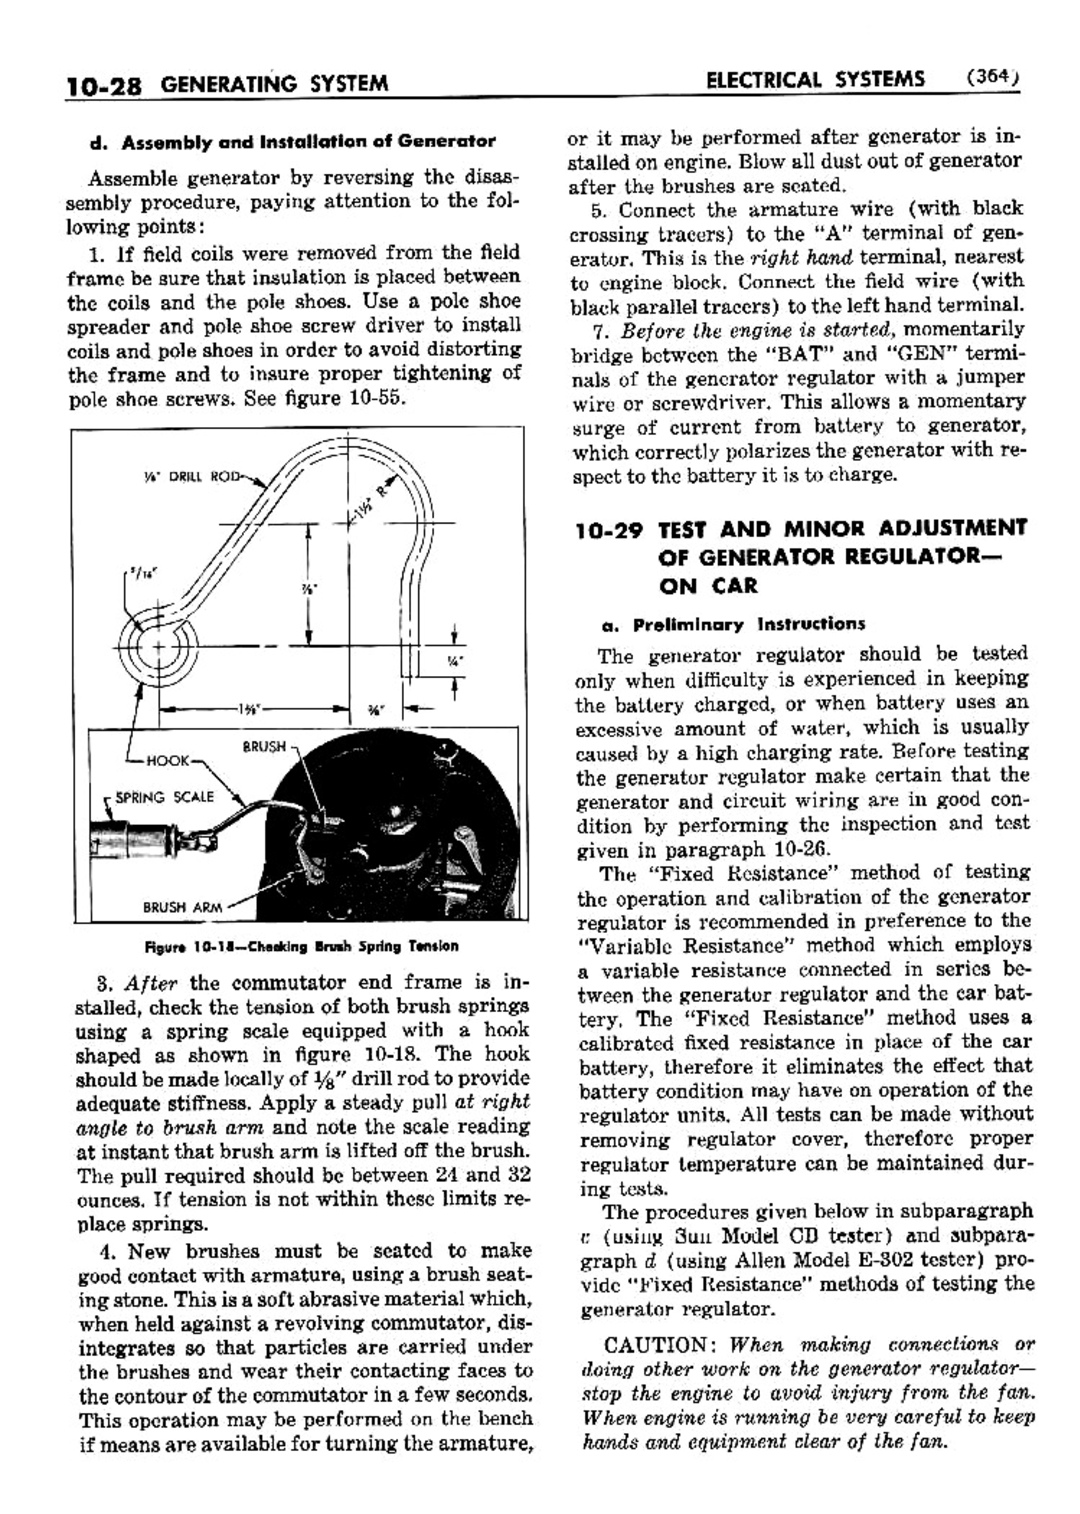 n_11 1952 Buick Shop Manual - Electrical Systems-028-028.jpg